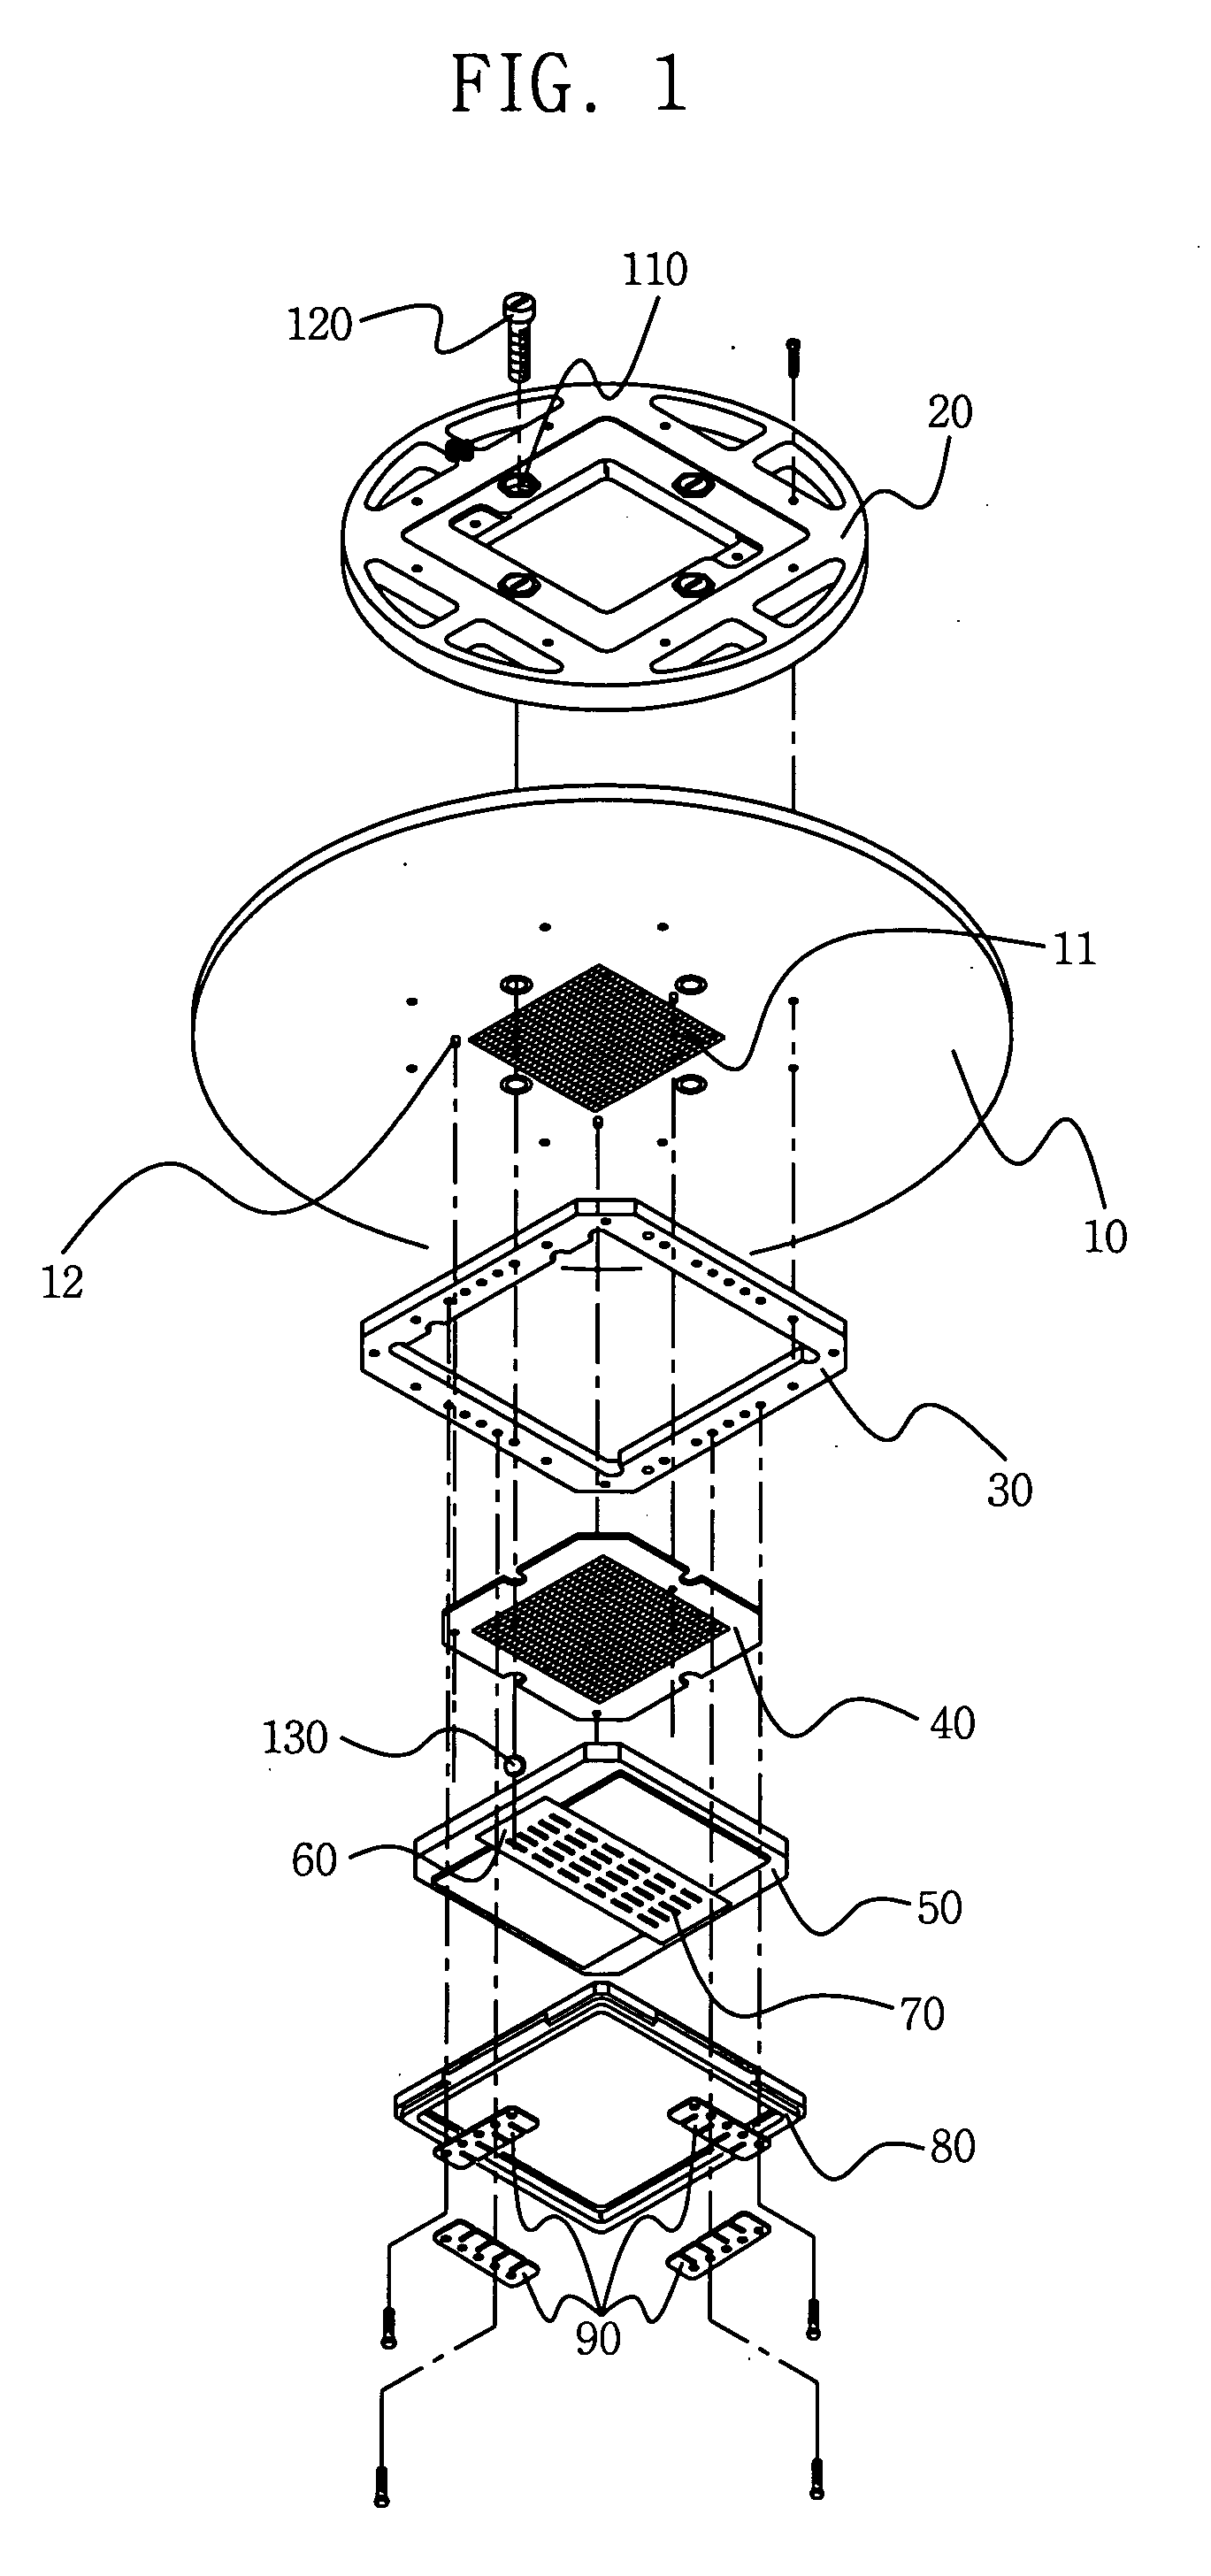 Probe card for testing semiconductor device